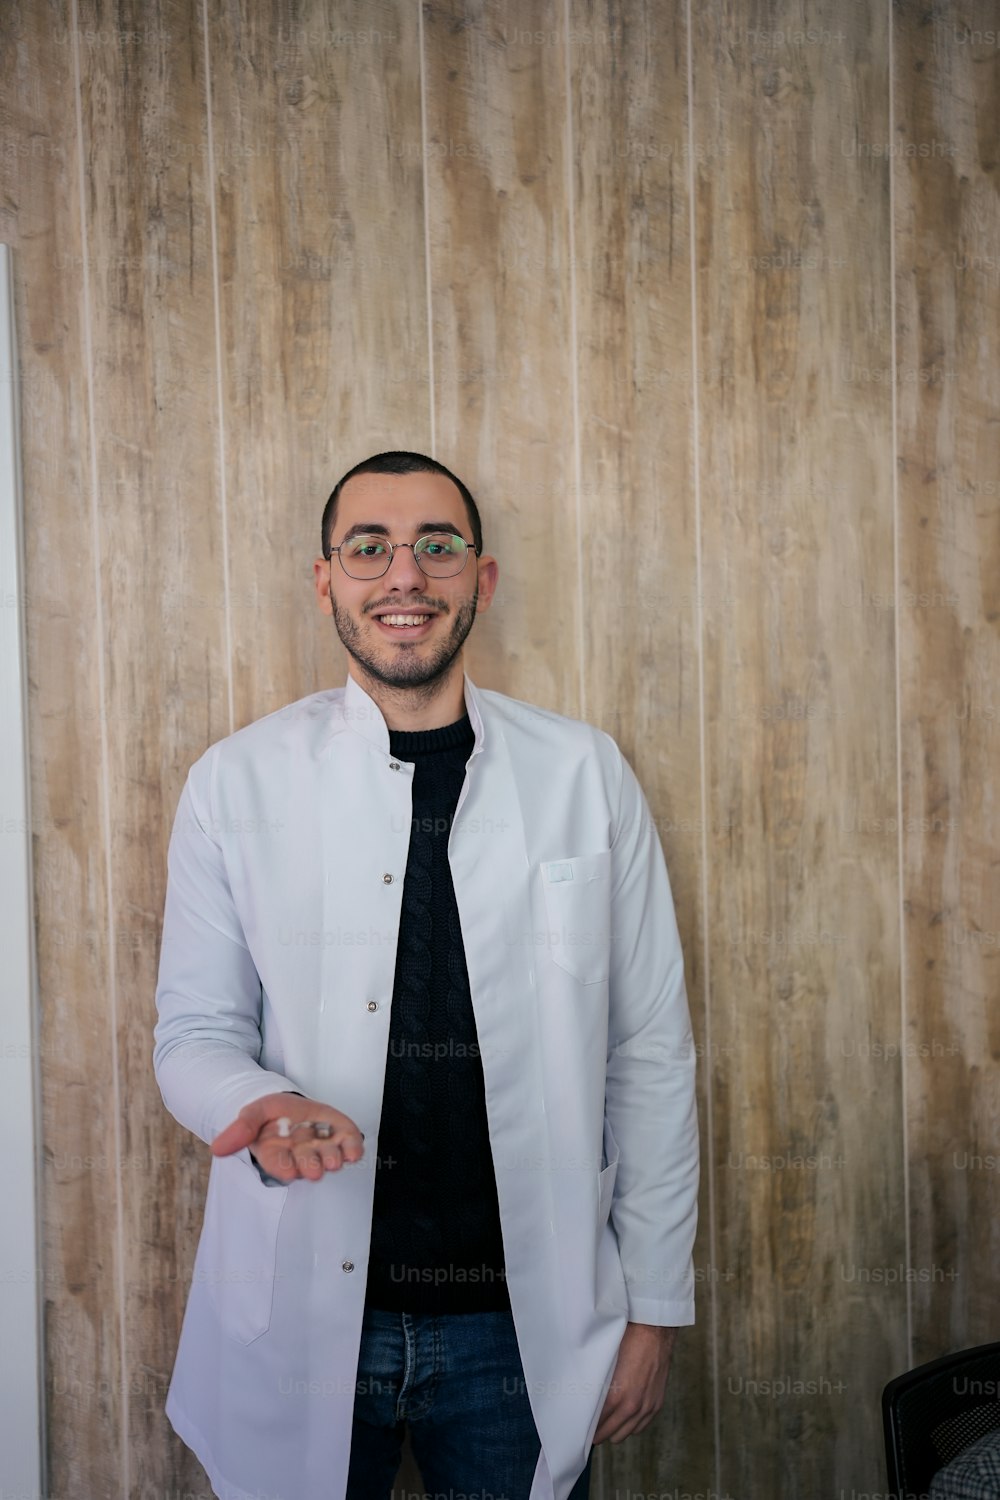 a man in a lab coat and tie standing in front of a wooden wall